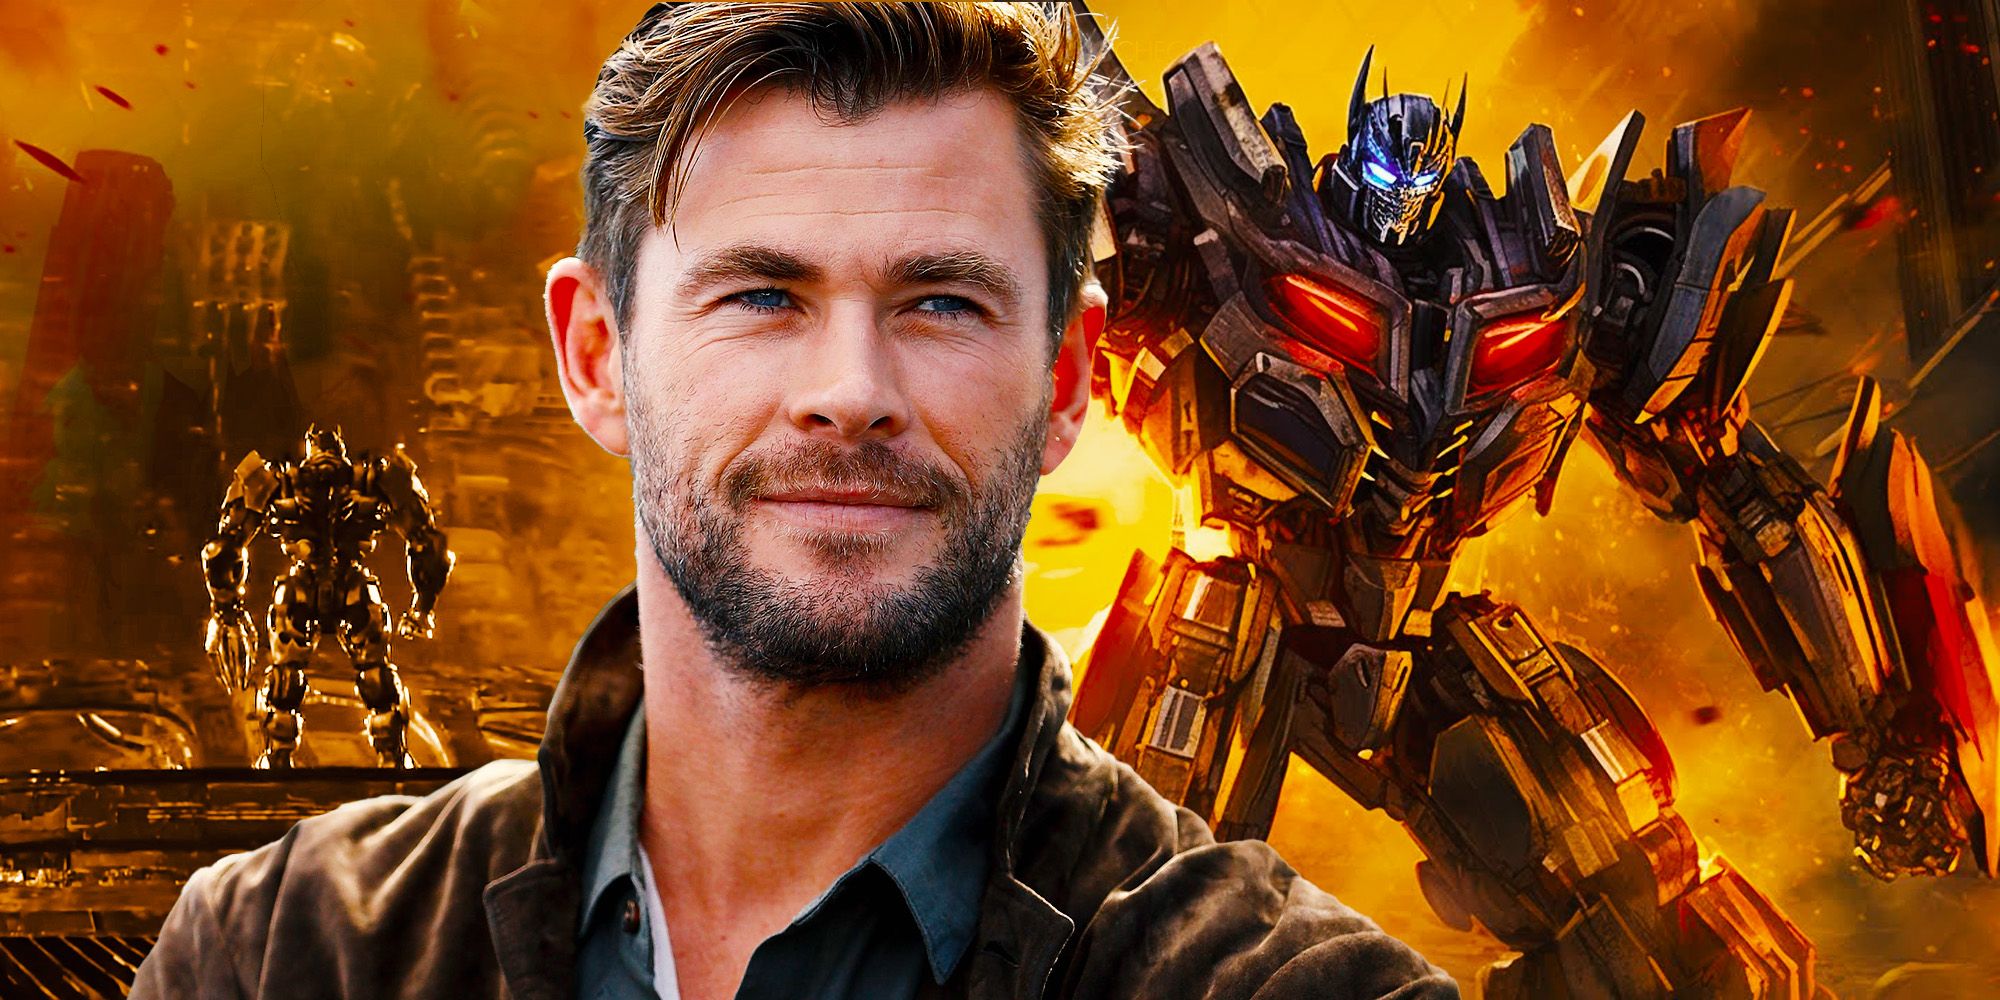 Chris Hemsworth in front a Transformers poster with Optimus Prime.